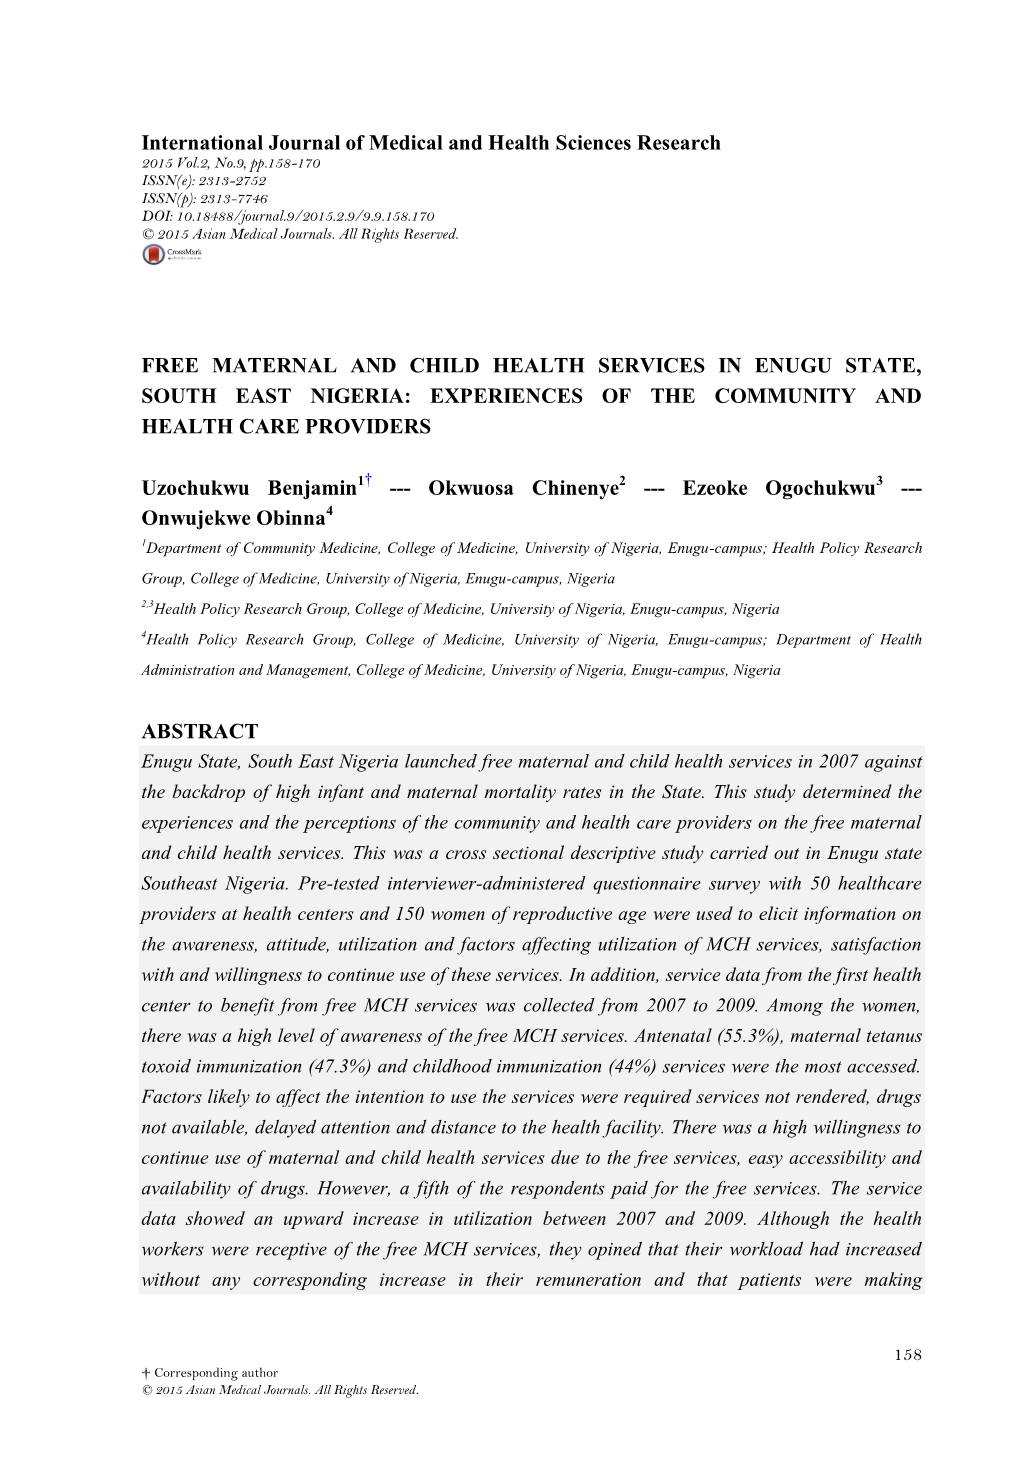 Free Maternal and Child Health Services in Enugu State, South East Nigeria: Experiences of the Community and Health Care Providers